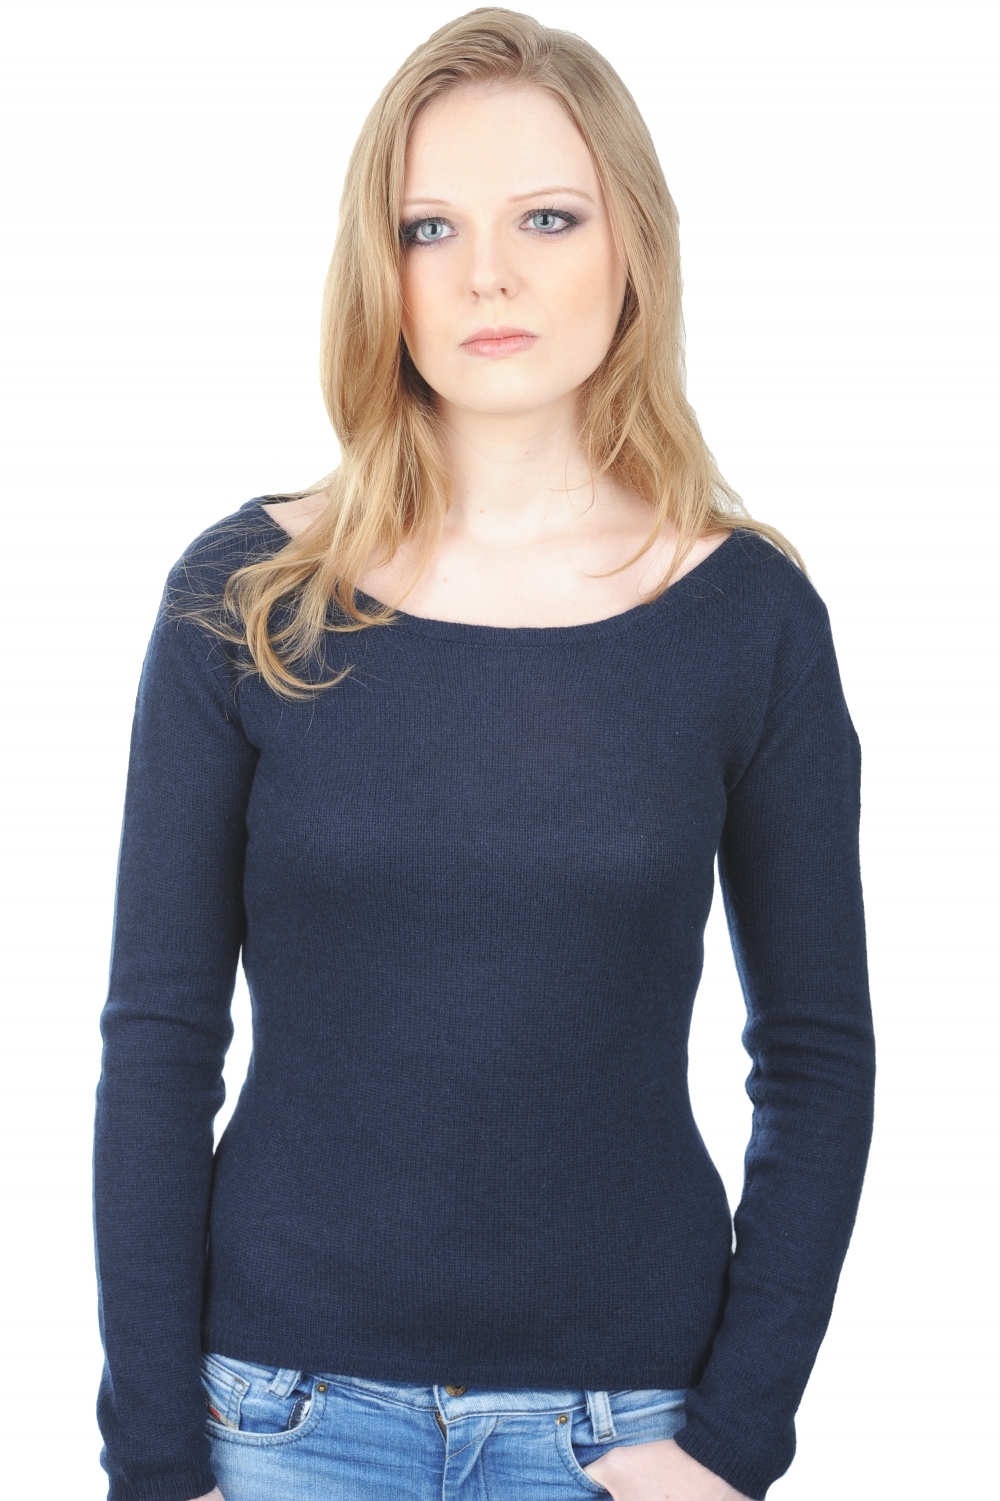 Cashmere ladies basic sweaters at low prices caleen dress blue xl